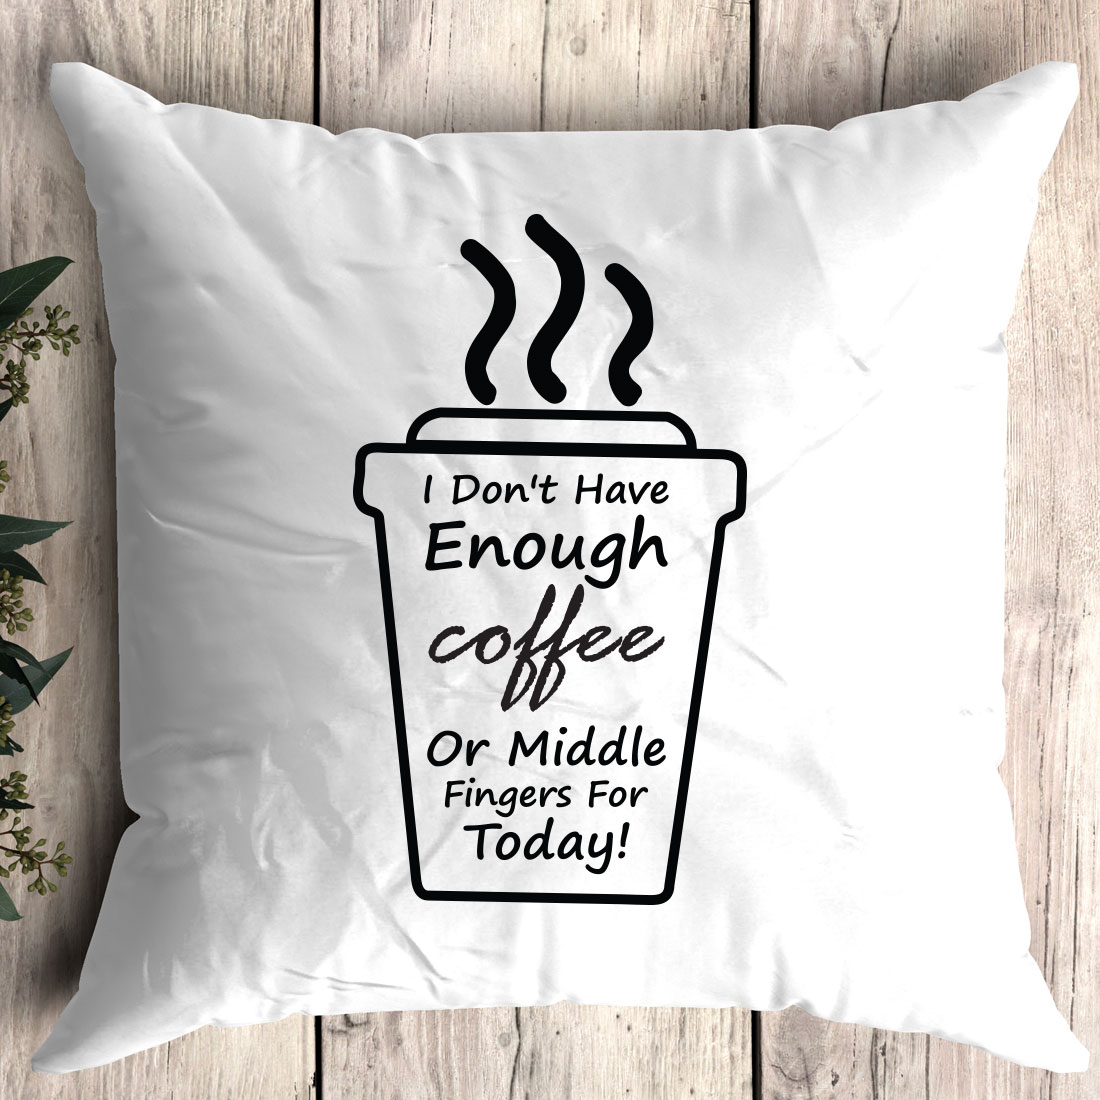 Pillow that says i don't have enough coffee or middle fingers for today.